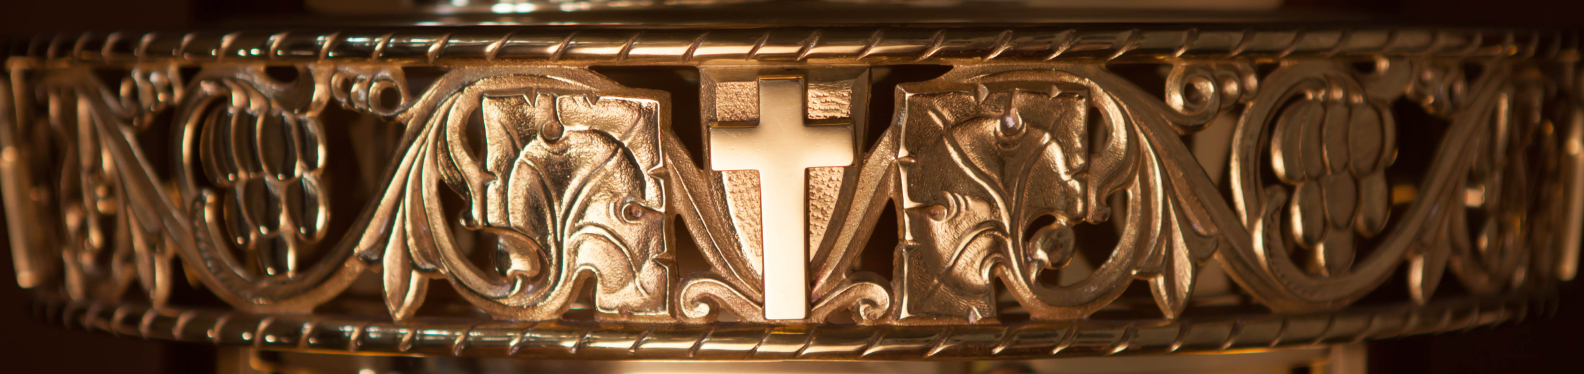 Detail of a gold cross on the Tabernacle